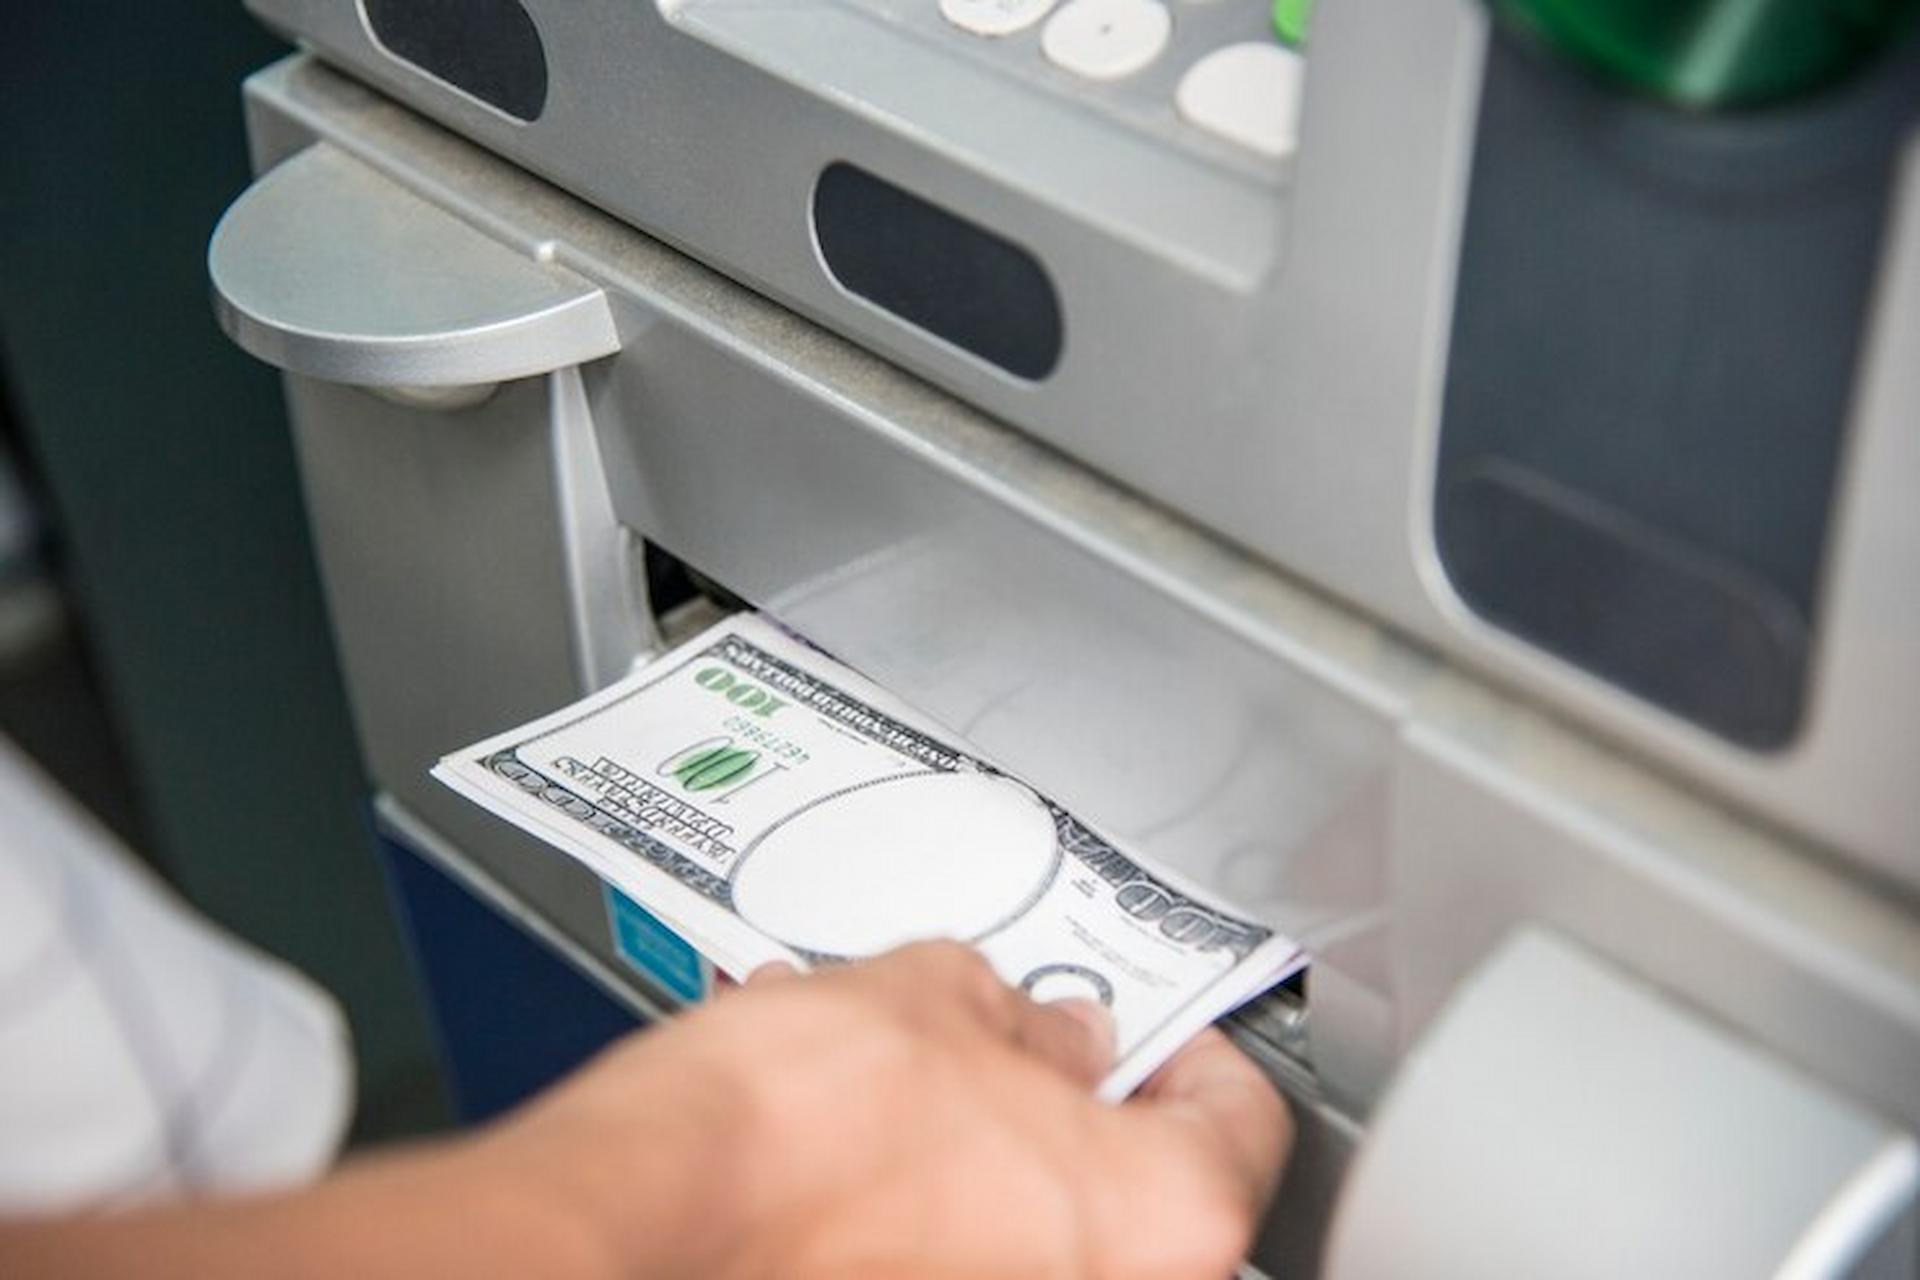 What Are the Factors that Purchasers Look for When Buying an ATM Portfolio?